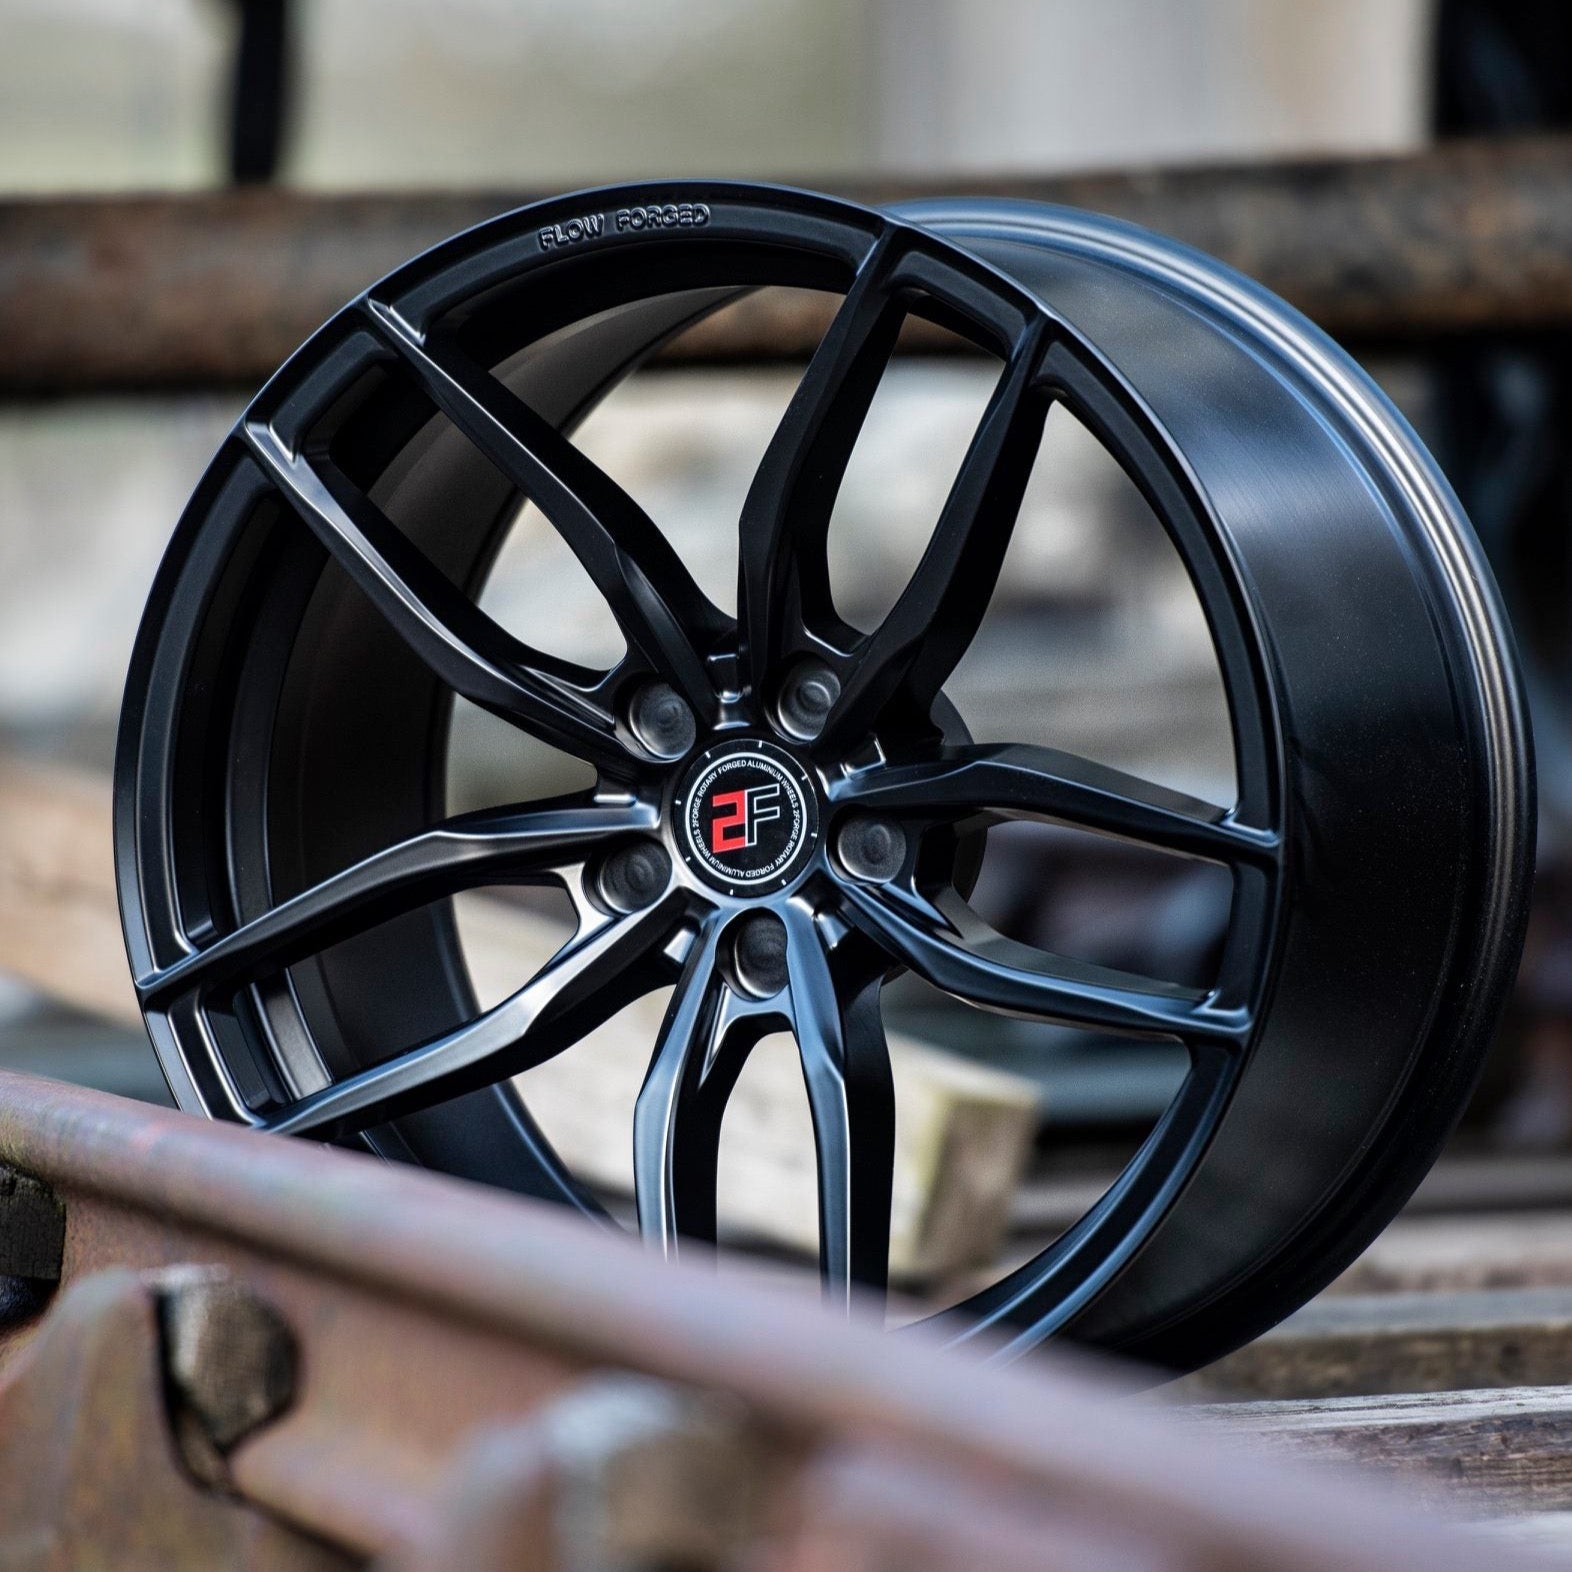 2Forge ZF3 Semi-Forged Wheels, Flow Forged Wheels, 2Forge - AUTOID | Premium Automotive Accessories